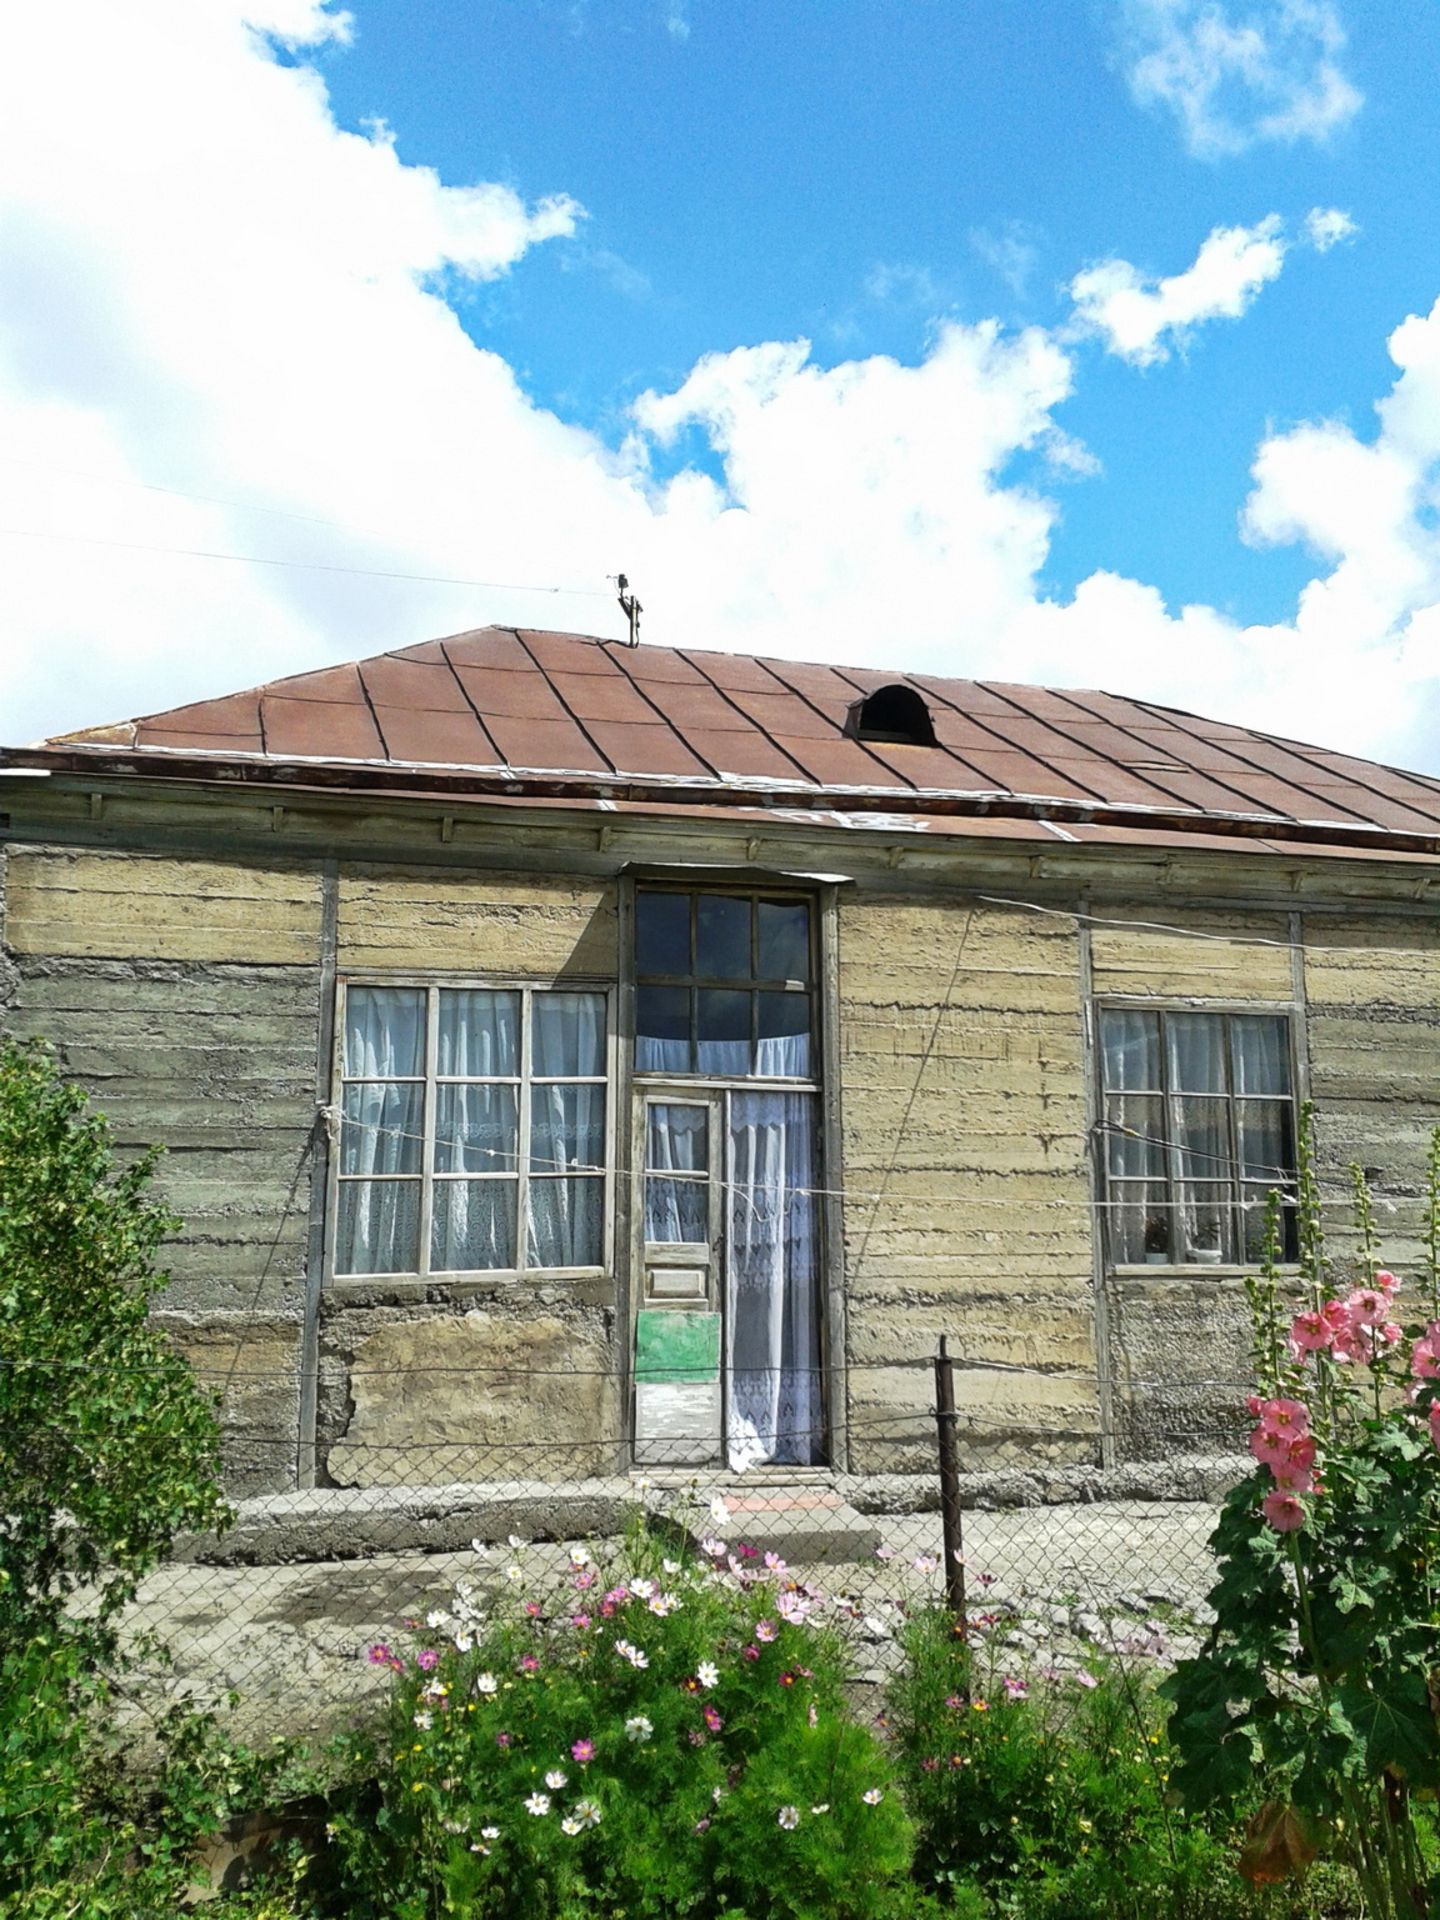 HOUSE IN 1 ACRE IN SOTK, ARMENIA - Image 4 of 35